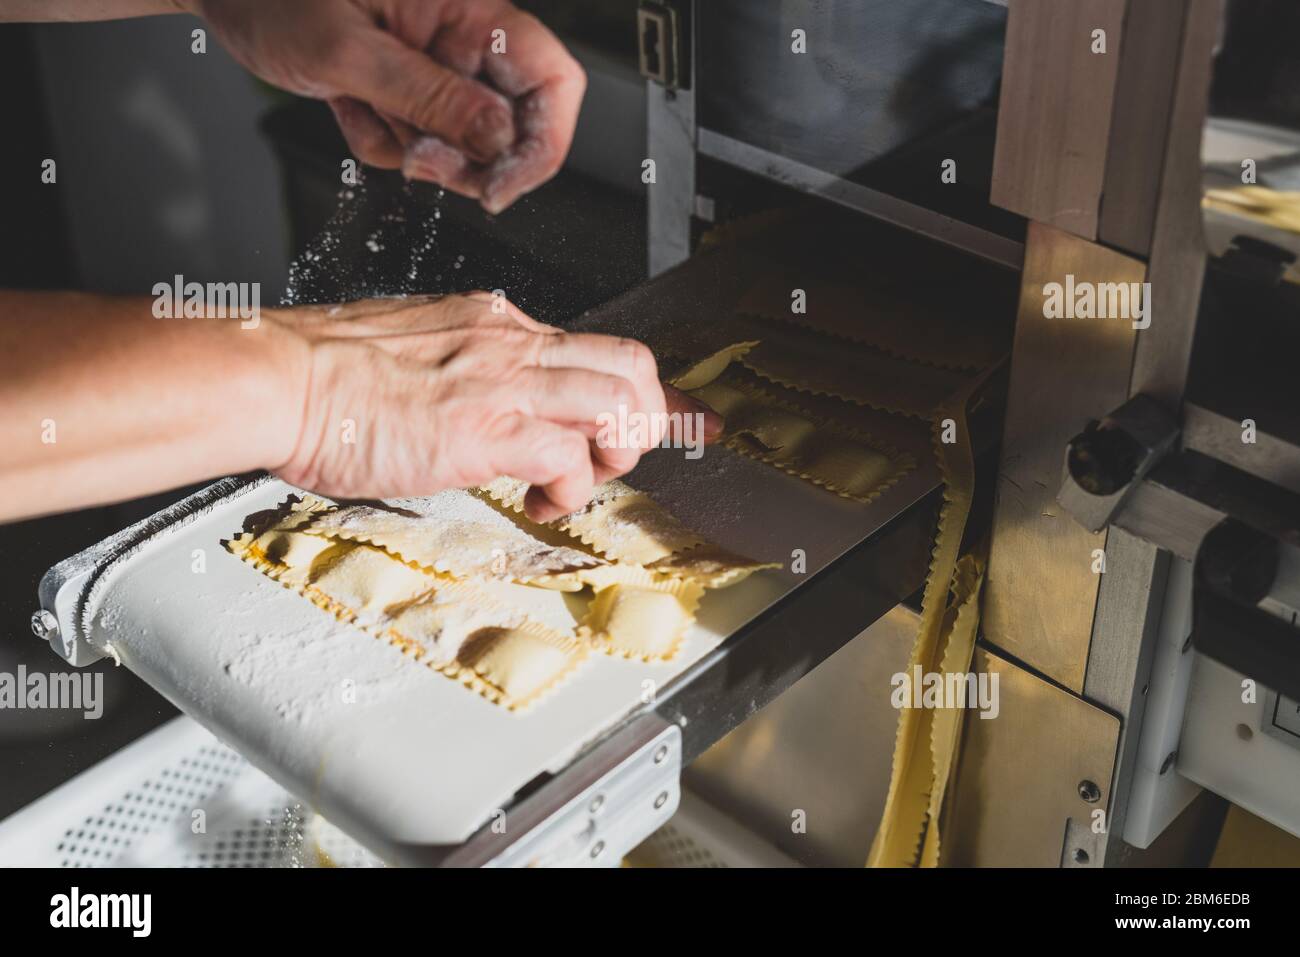 production process of ravioli, tortellini and cappelletti, typical fresh Italian pasta - the hands of the chef flour the ravioli just produced by the Stock Photo